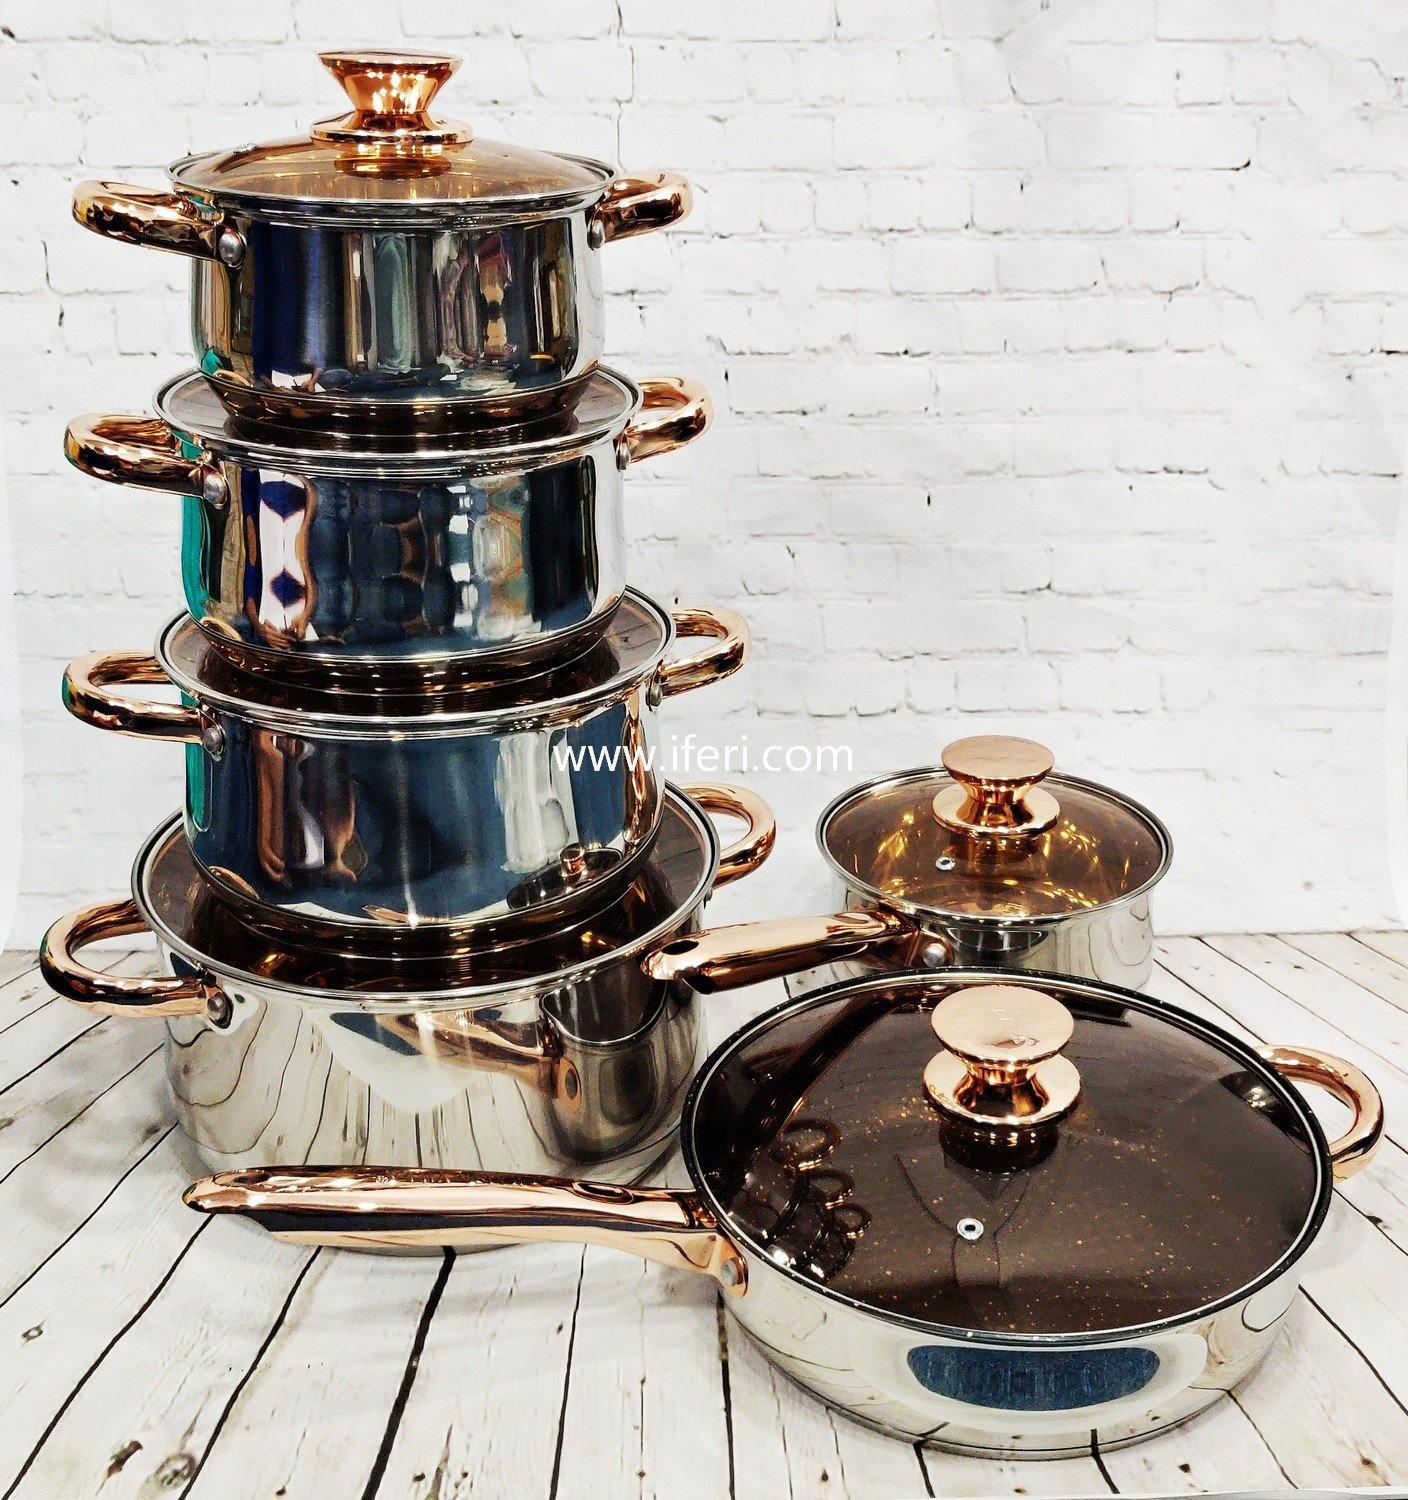 12 Pcs Stainless Steel Cookware Set With Lid TG4351 - Price in BD at iferi.com